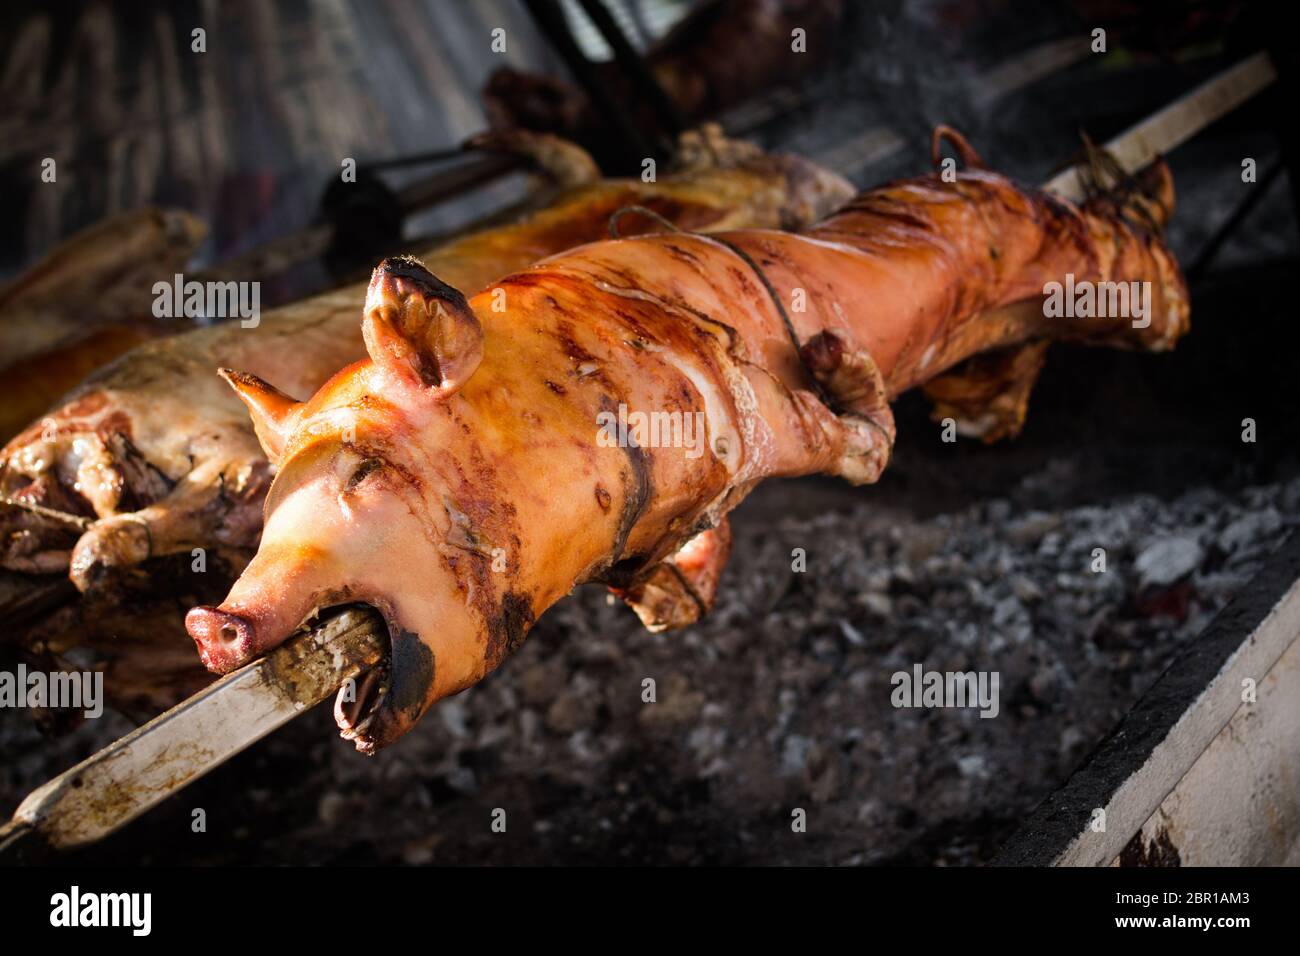 The young pig is roasting on spit, pork, meat, food. Stock Photo